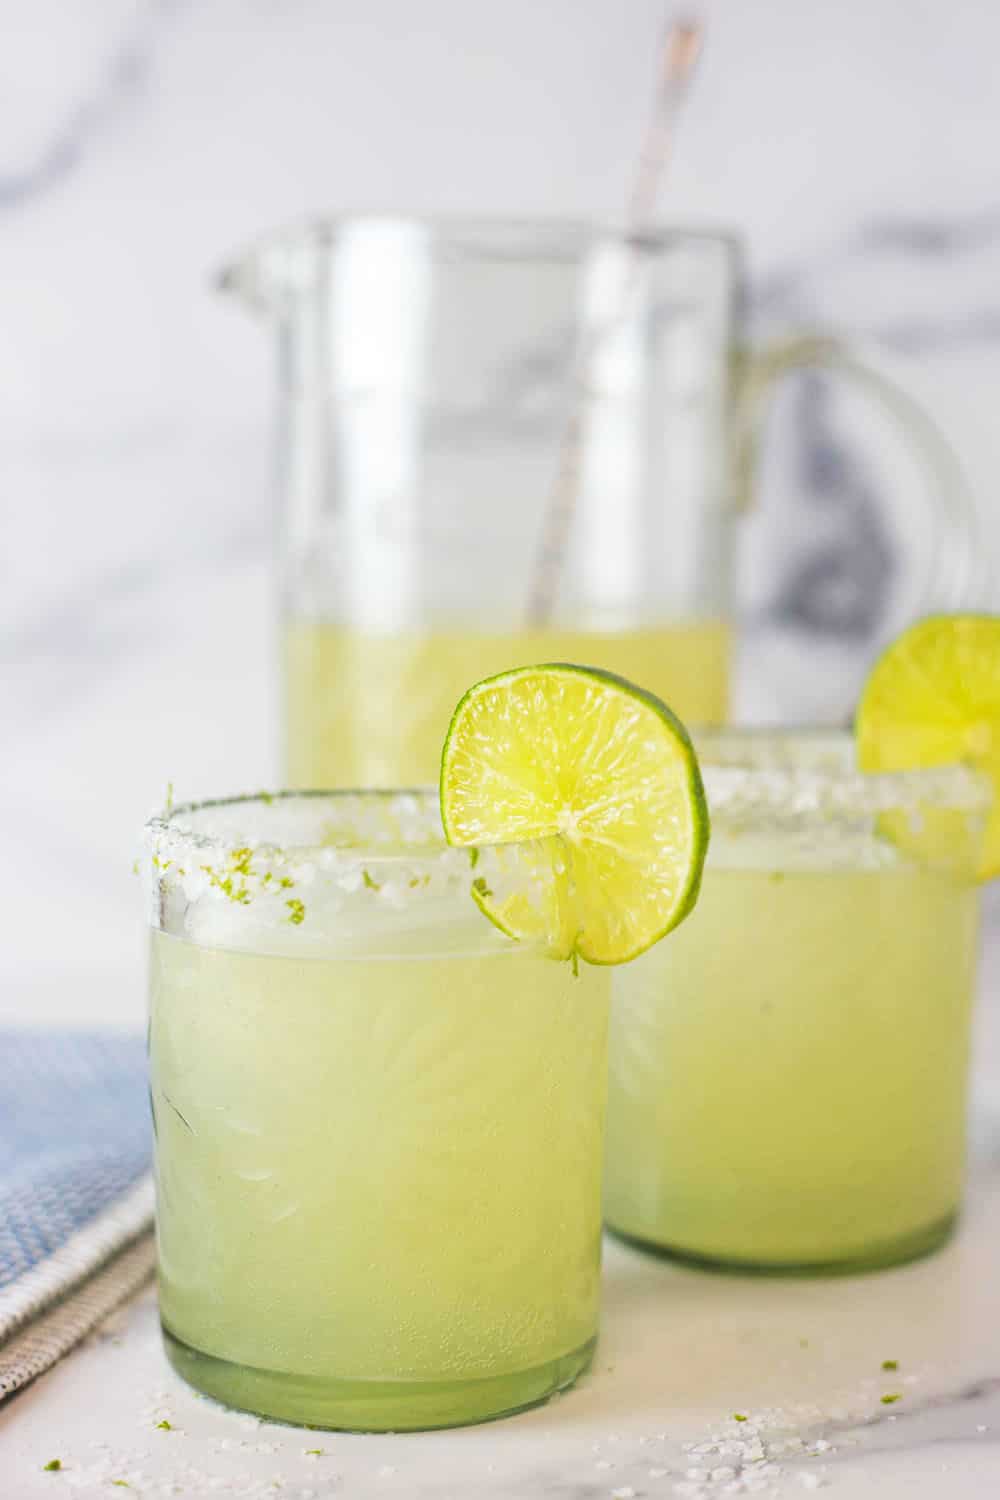 Extra Skinny Margaritas by the Pitcher - Artzy Foodie